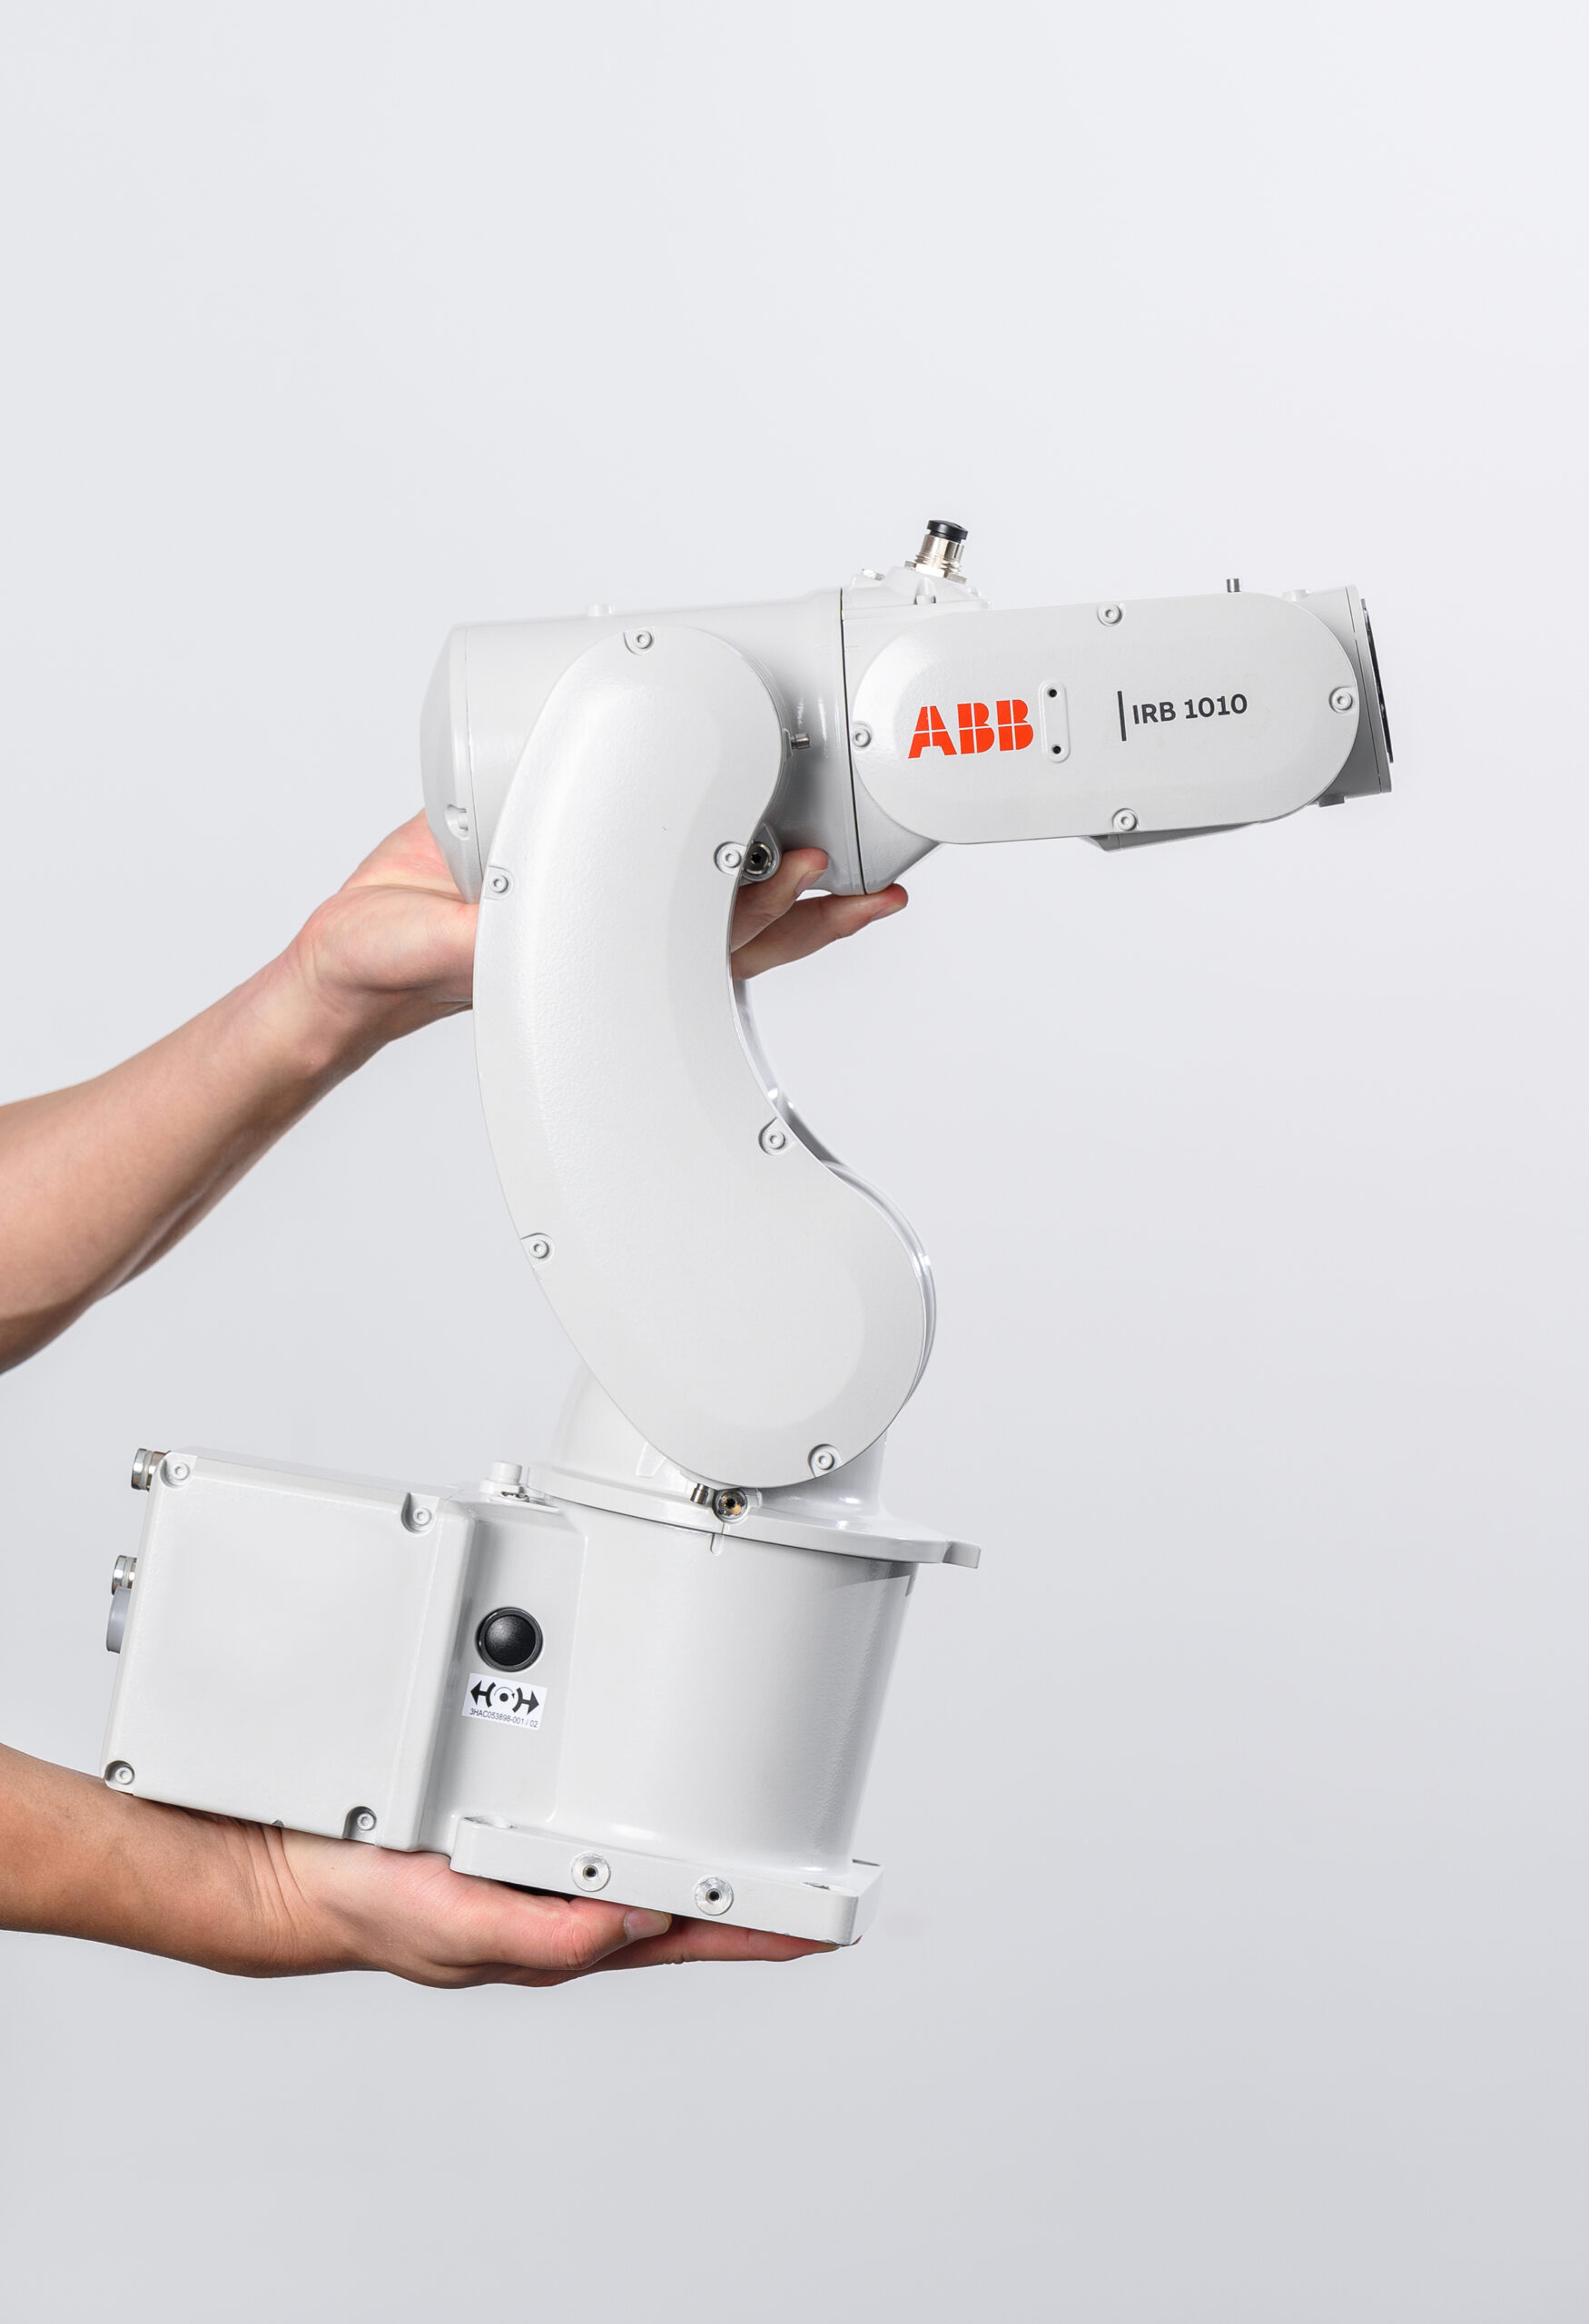 ABB Unveils Smallest Industrial Robot with Class-Leading Payload and Accuracy IndMacDig | Industrial Machinery Digest